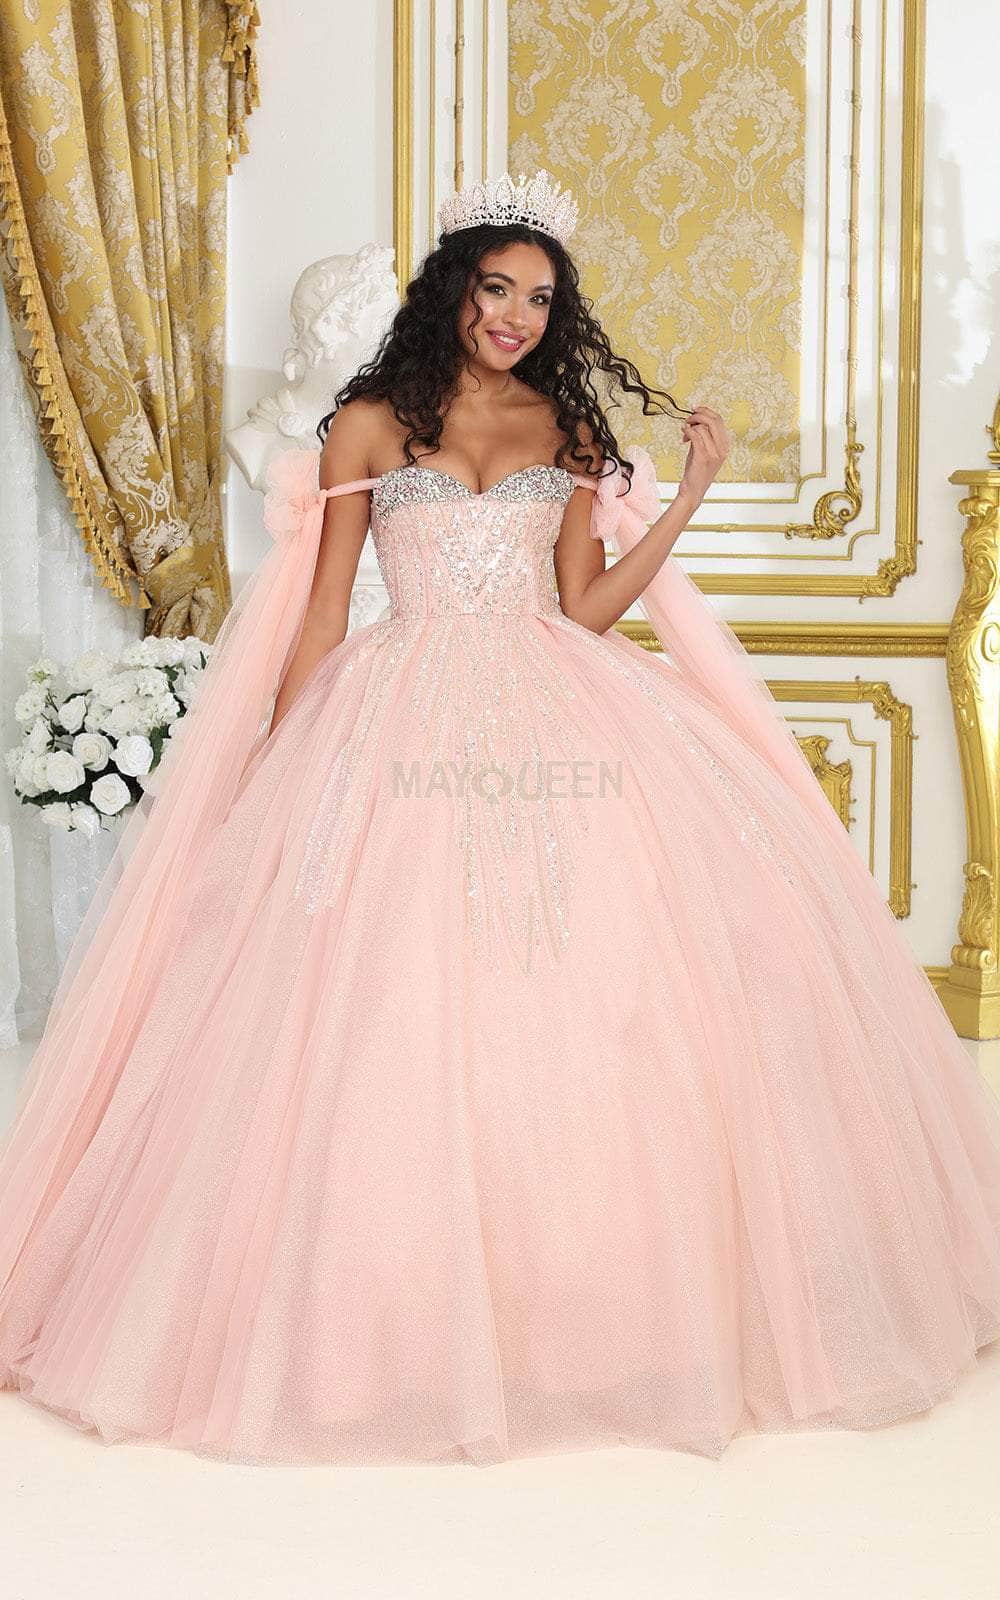 May Queen LK238 - Bow Draped Ballgown
